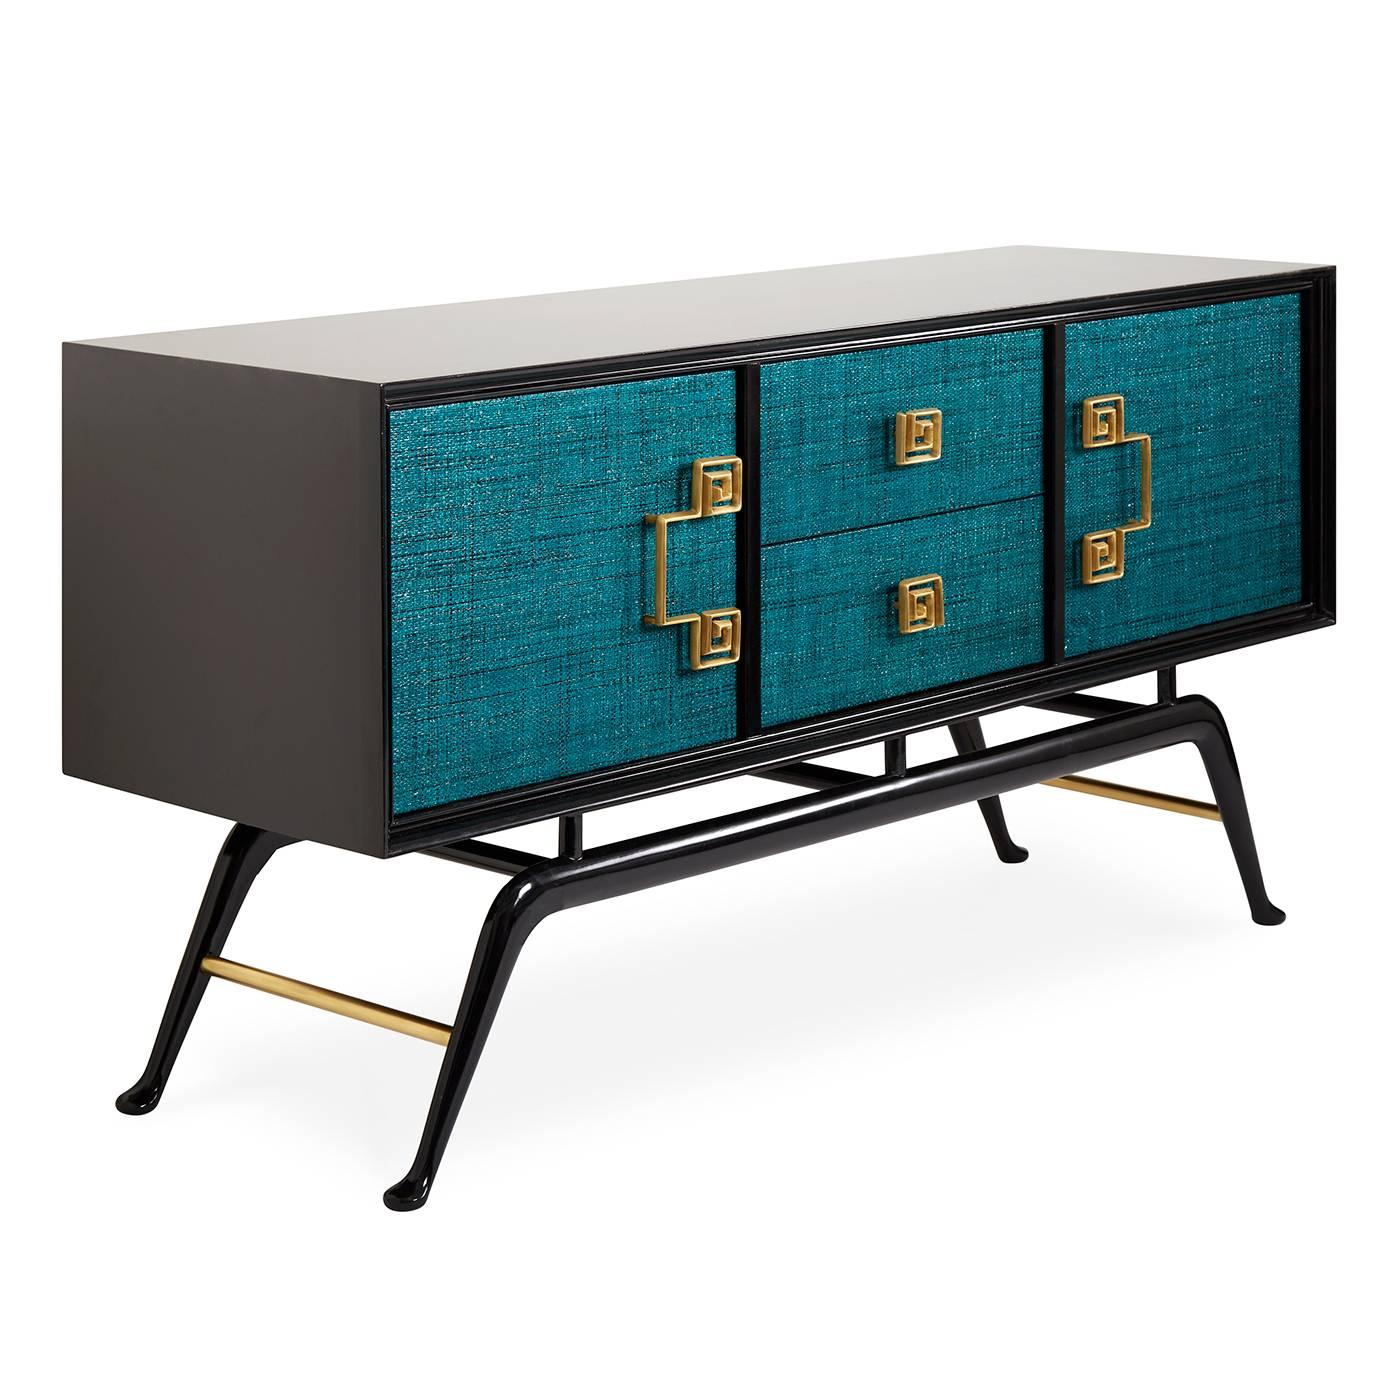 Revolutionary raffia. Inspired by JA's trip to Jim Thompson's legendary house in Bangkok, our Siam credenza captures the jewel-toned exoticism of old Siam. An ebonized mahogany base with brass accents supports a case faced with natural raffia, which